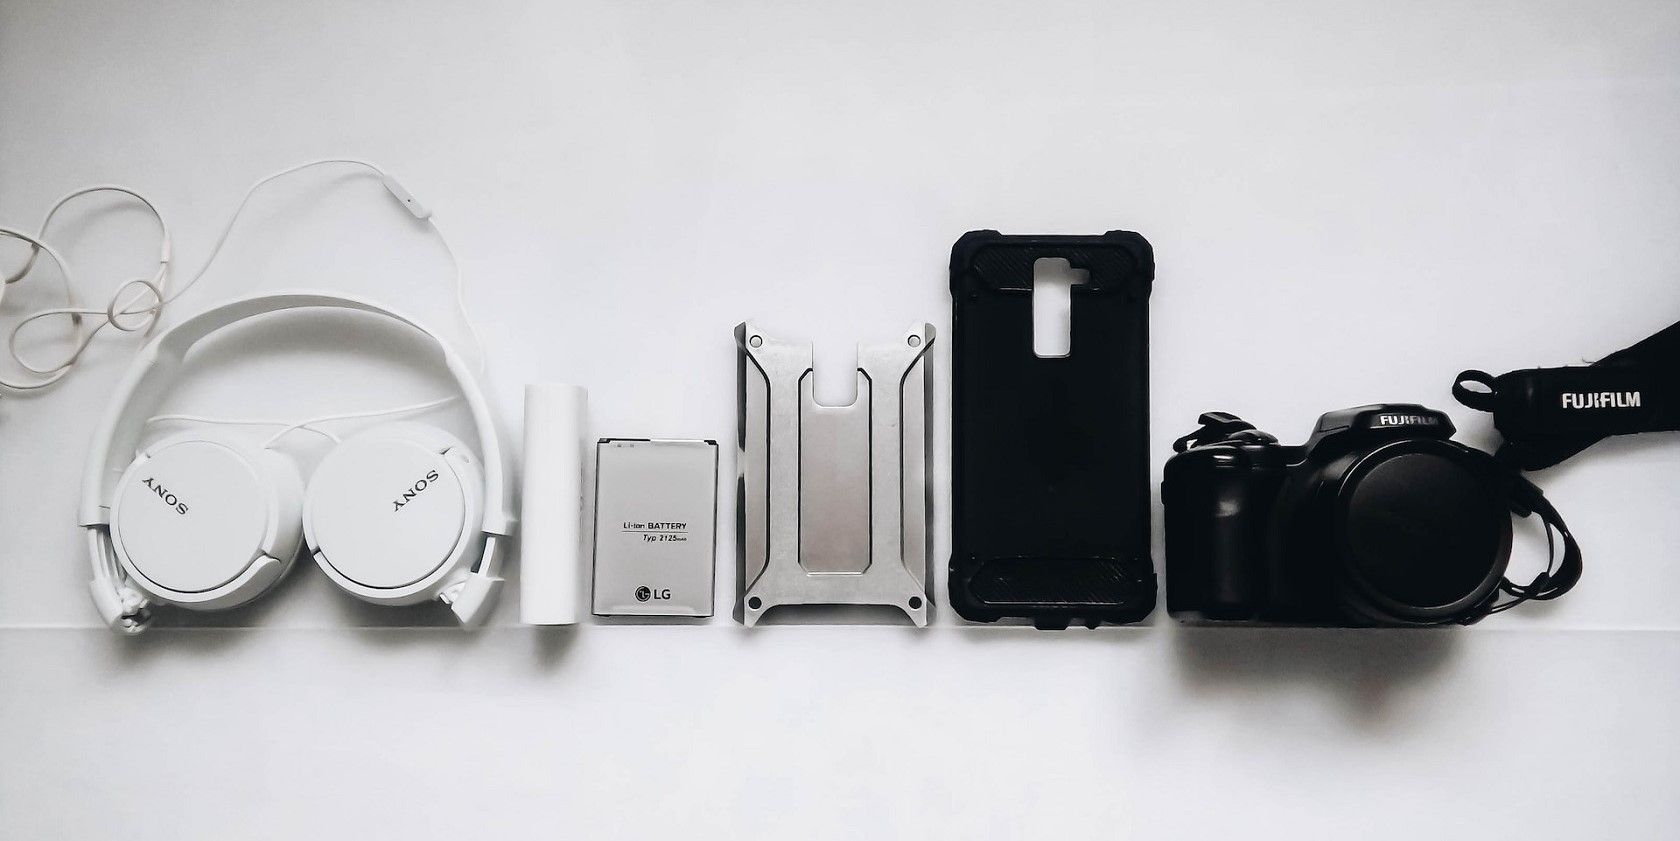 A Sony headphone, a Fujifilm camera, a phone case, and a few other accessories 